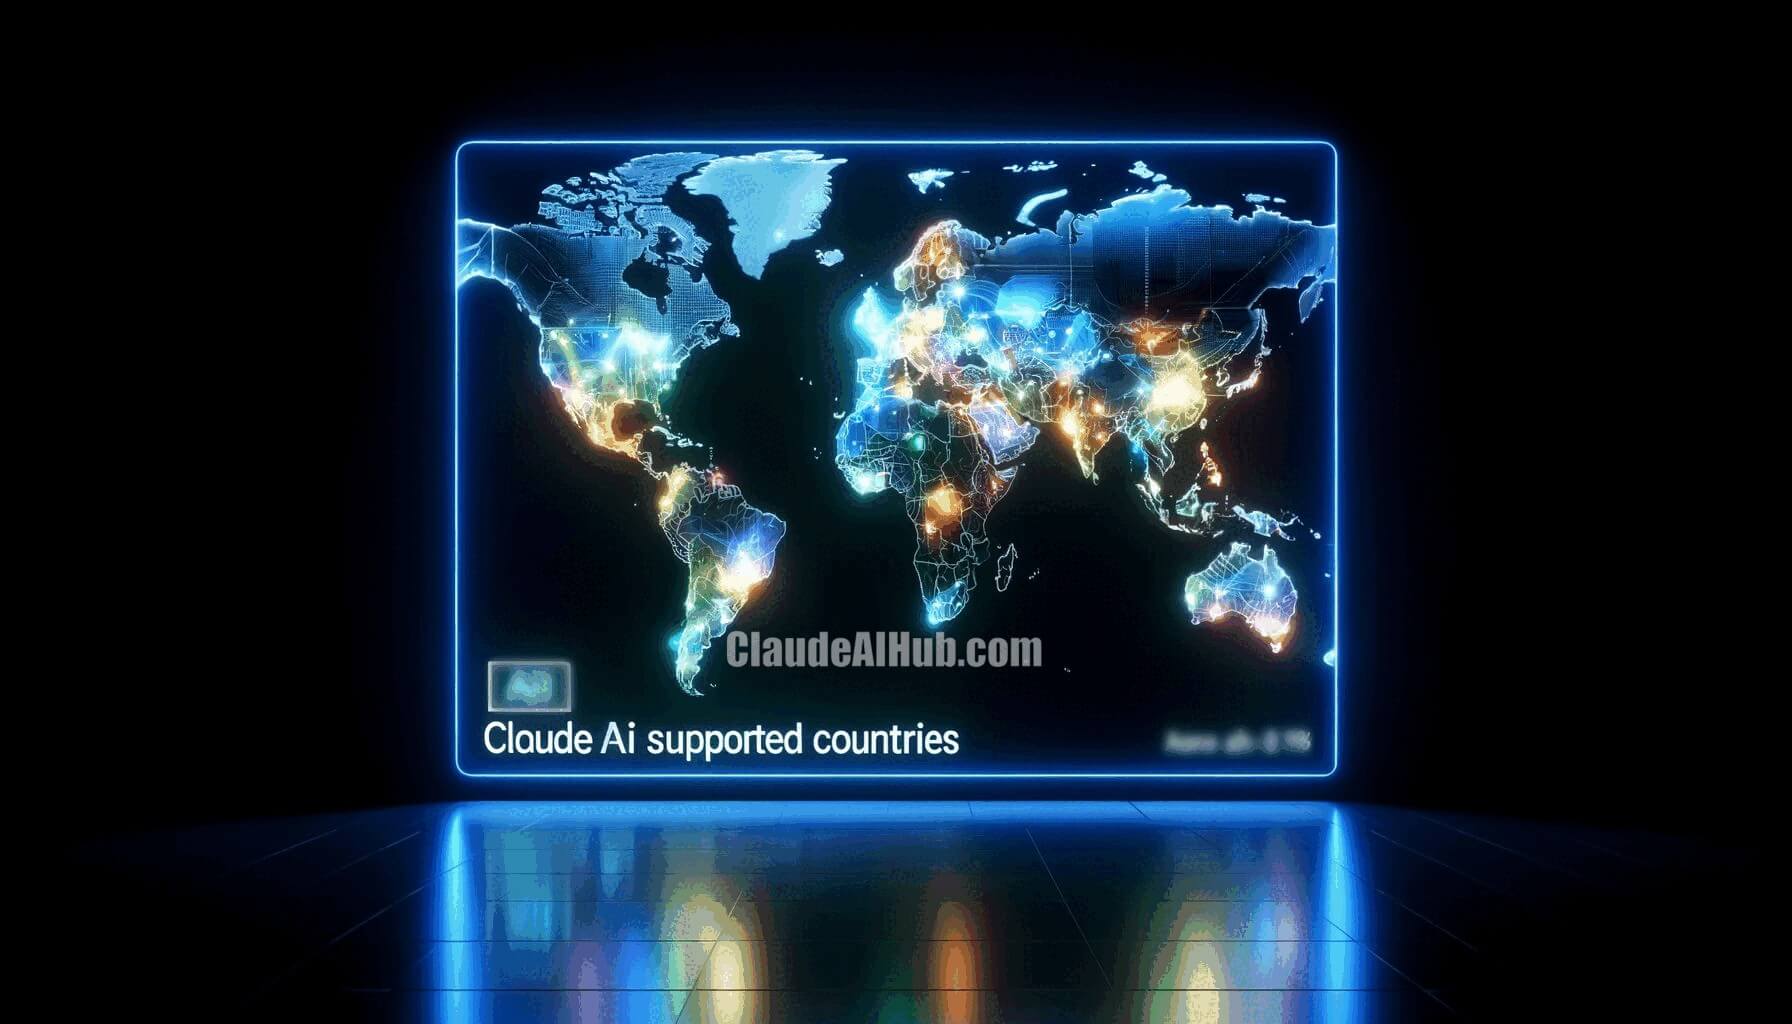 Claude AI Supported Countries